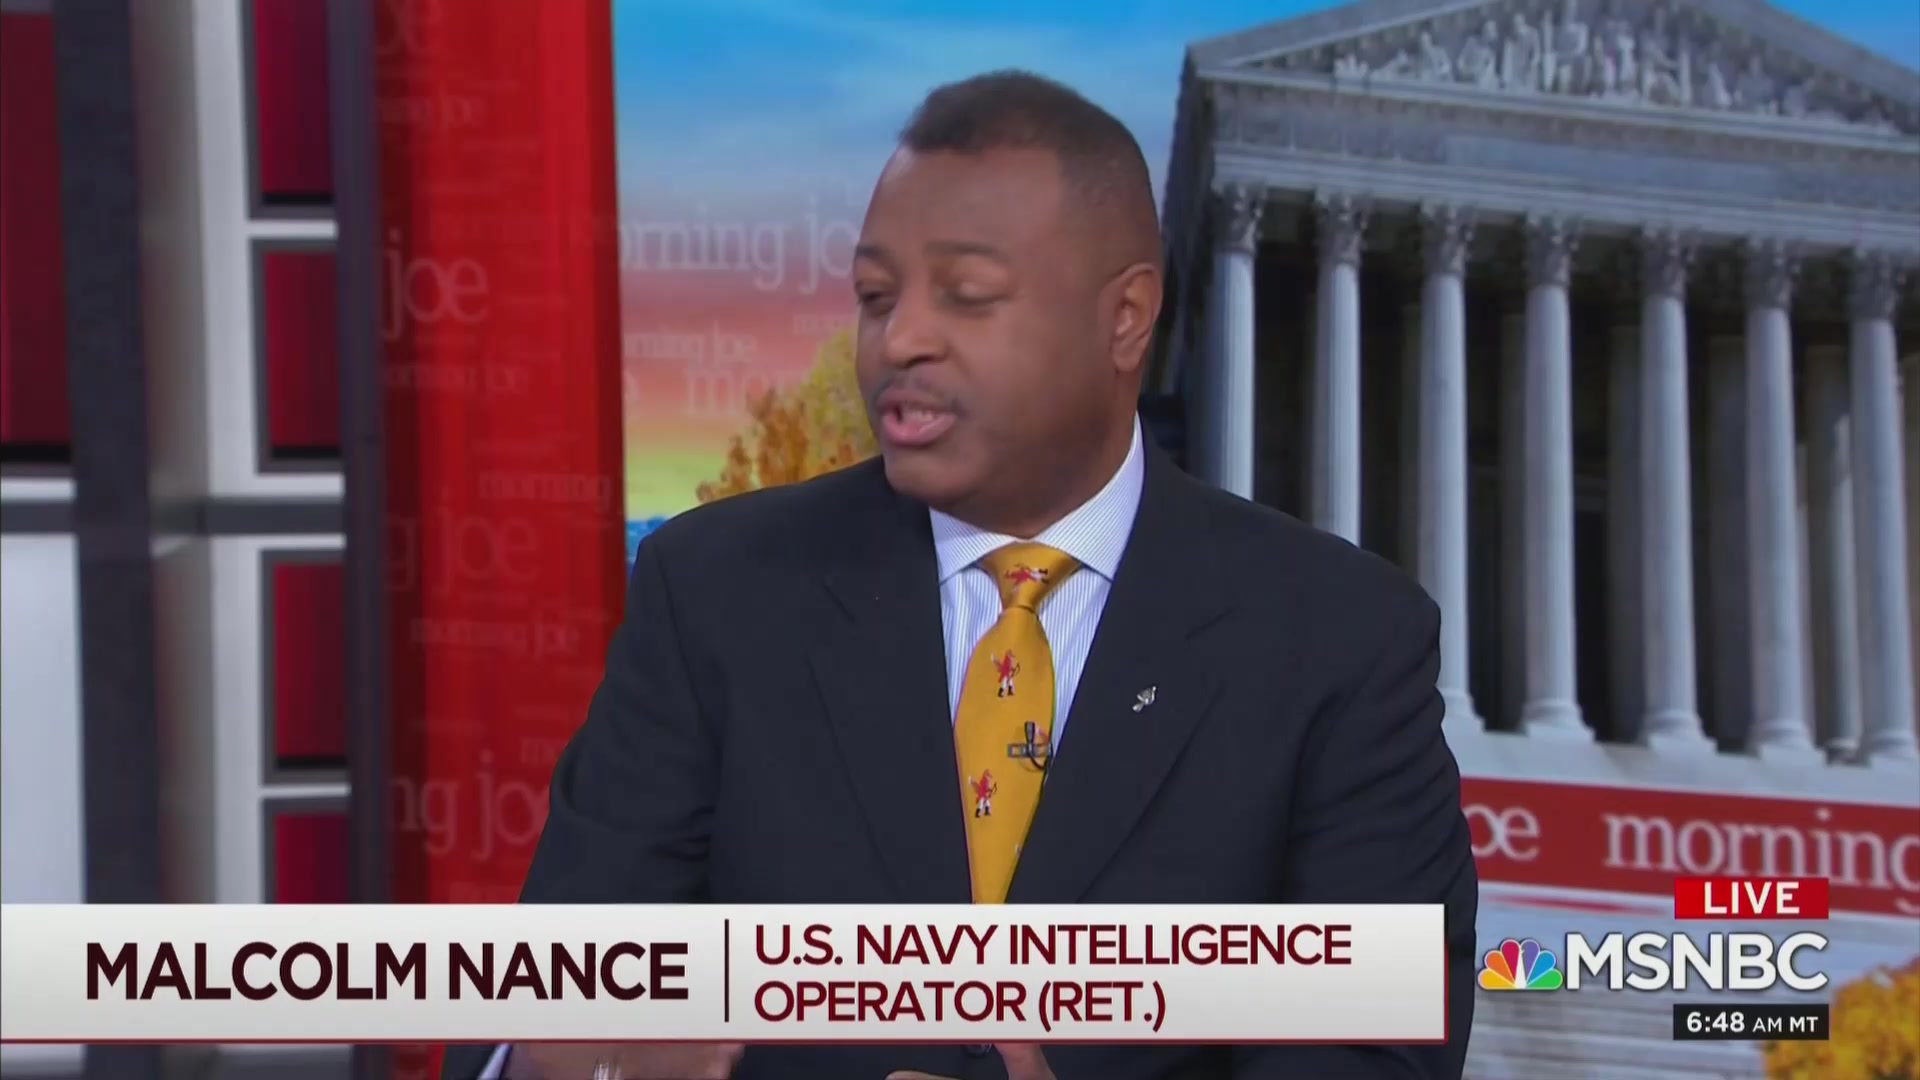 MSNBC’s Malcolm Nance: Trump’s a Russian Asset Who Was Surveilled as ‘Early as 1977’